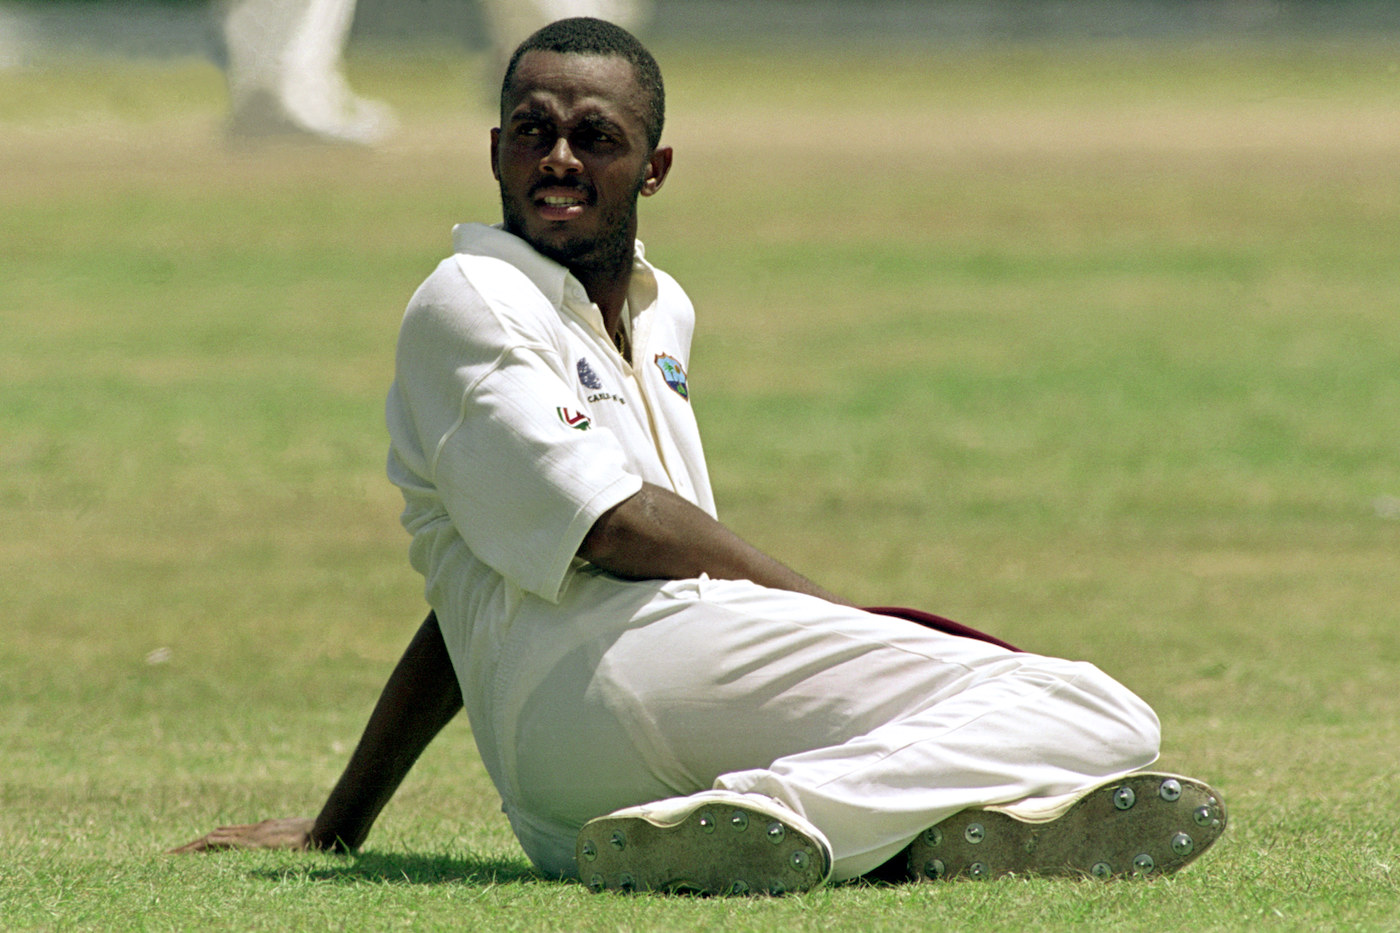 What is the name of this wicket taker?